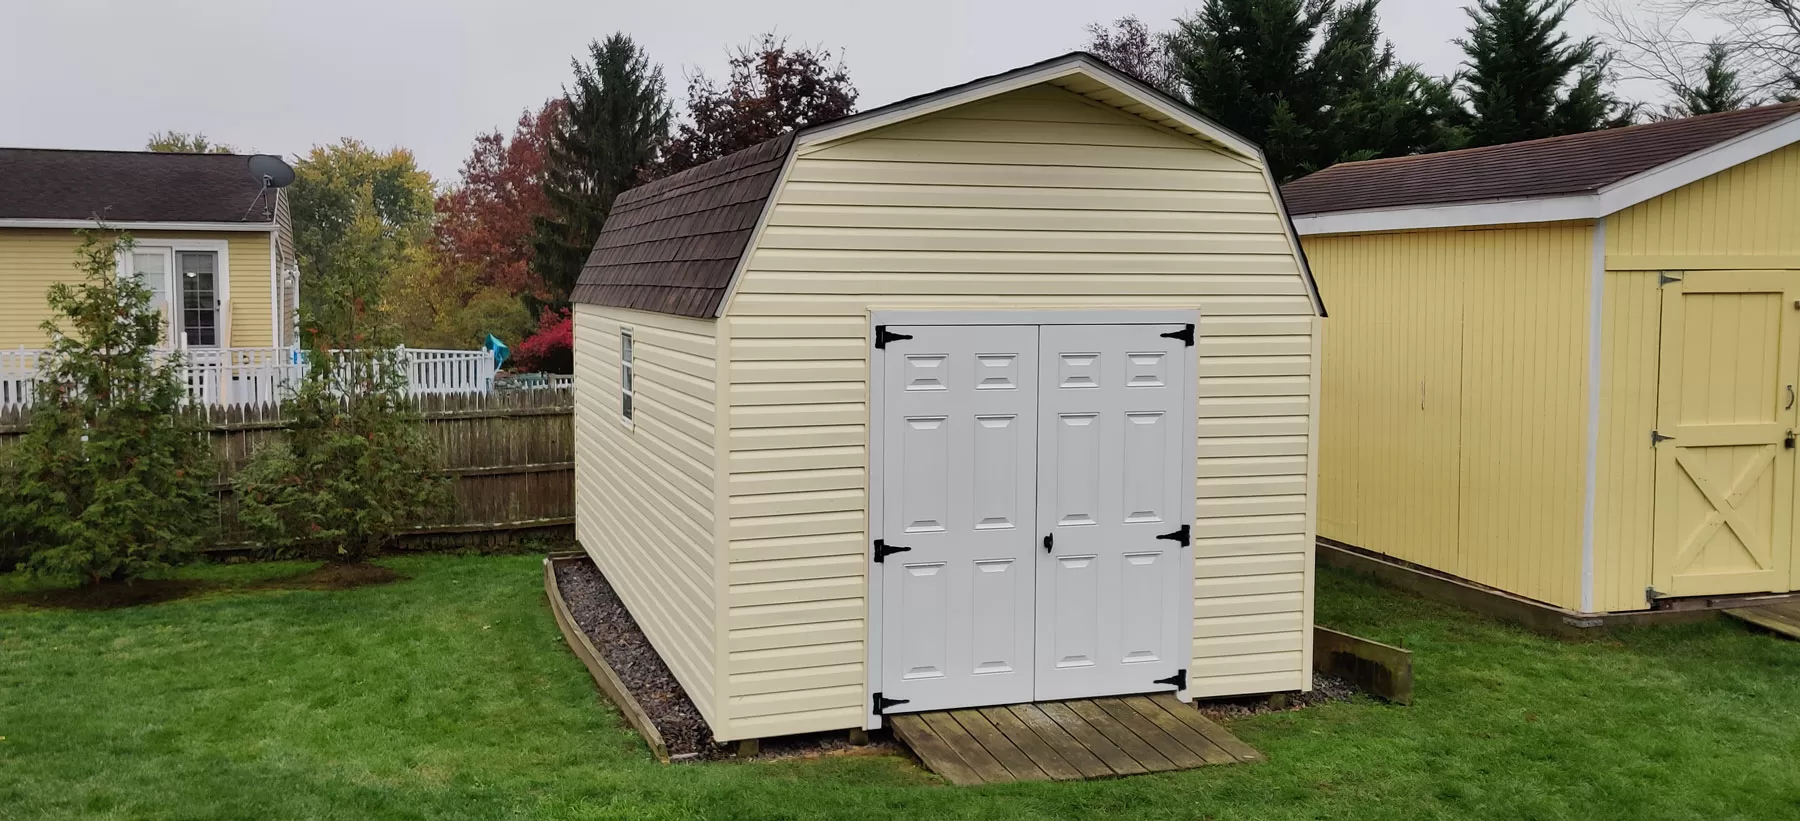 Shed Repair Services In Chester County Pa